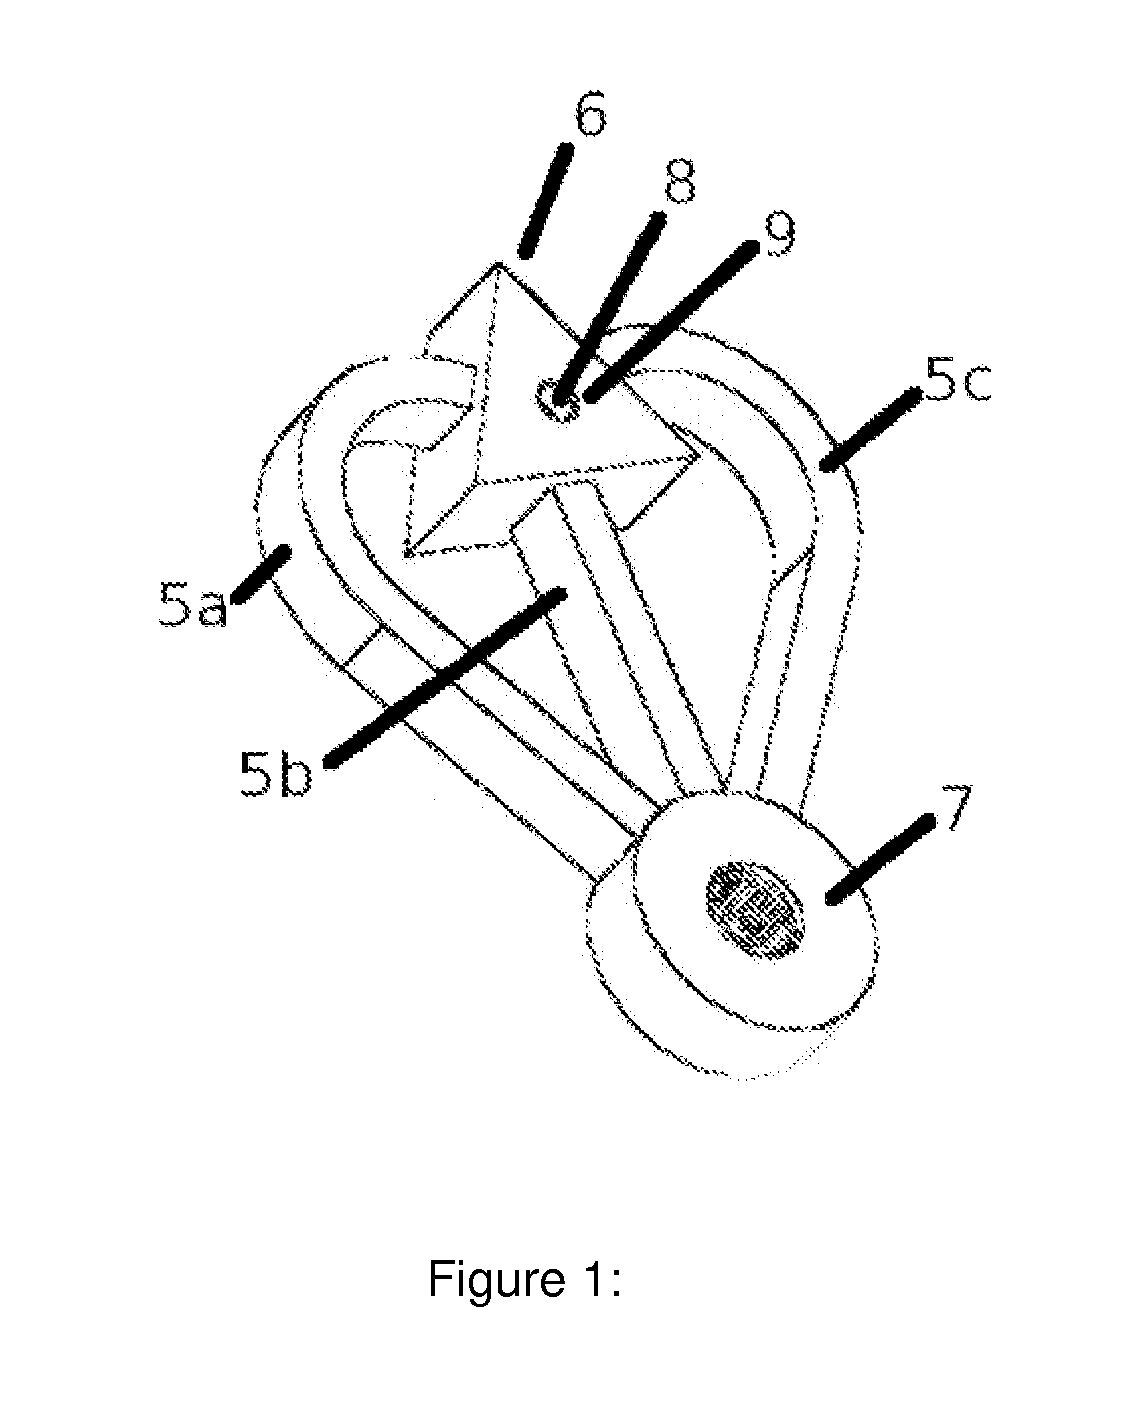 Apparatus for generating thermodynamically cold microwave plasma